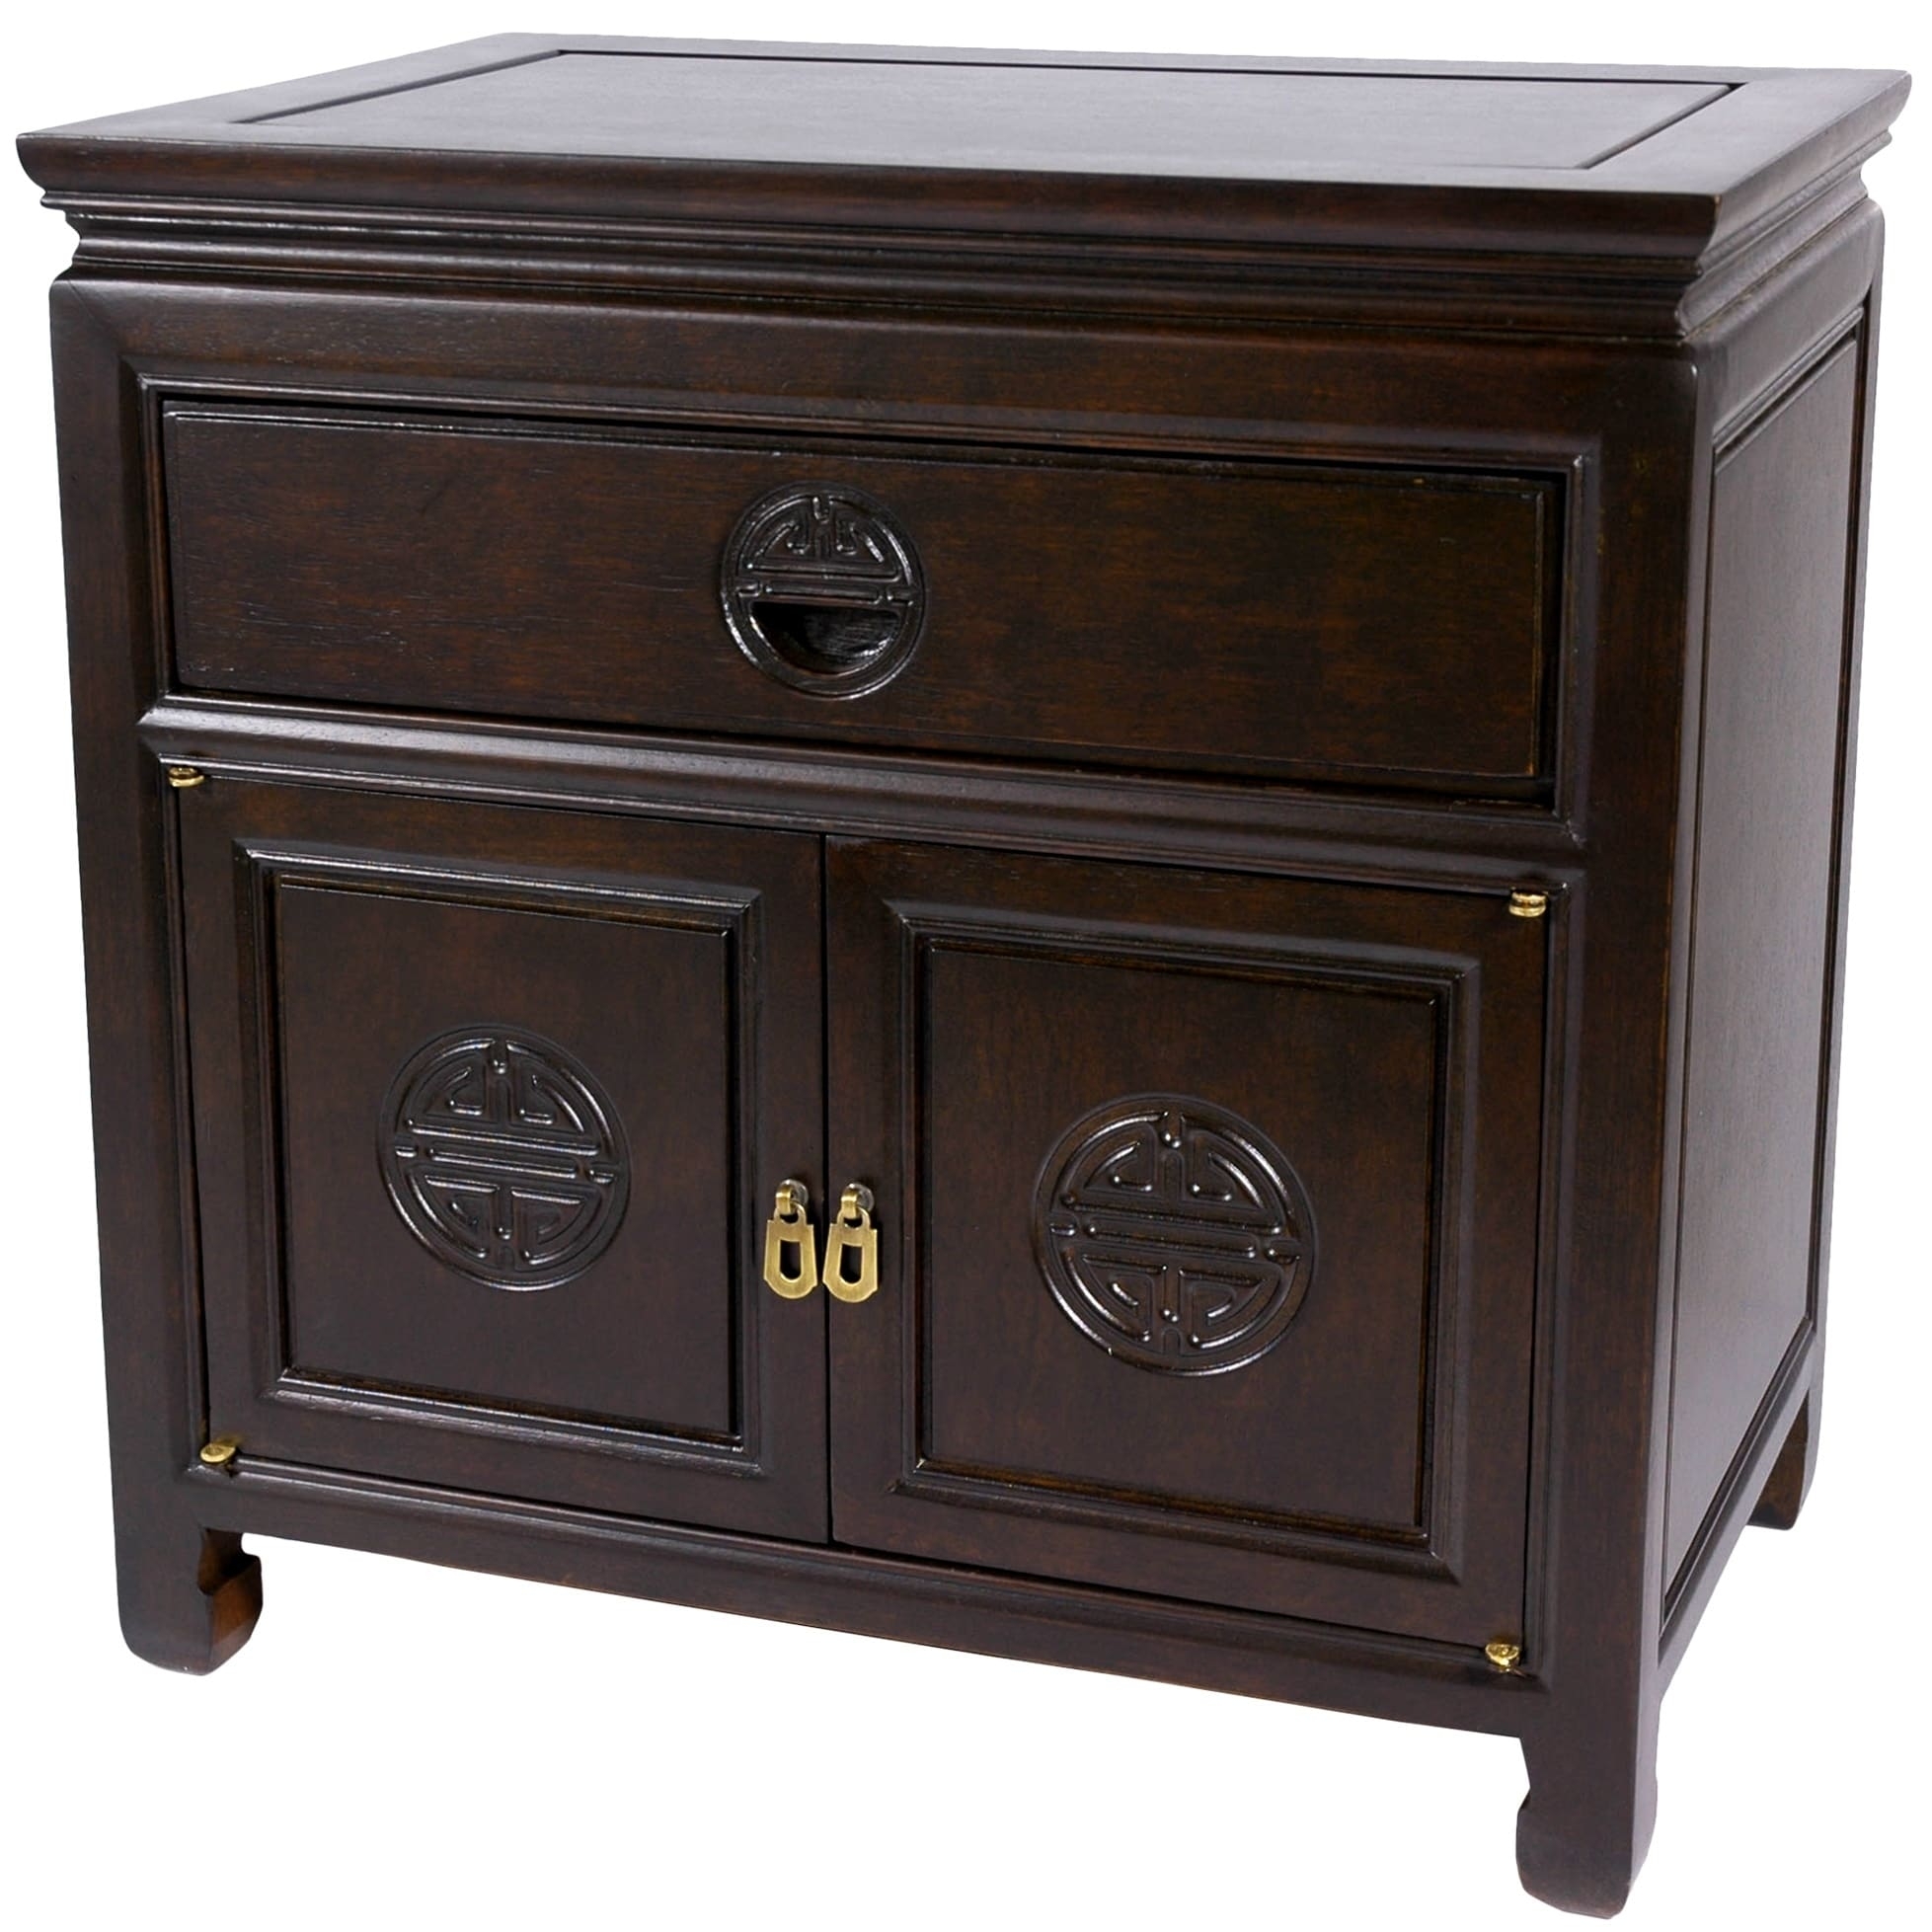 Elegant Traditional Beautiful - 22" Qing Chinese Rosewood Nightstand Cabinet - 2 Fine Wood Finishes